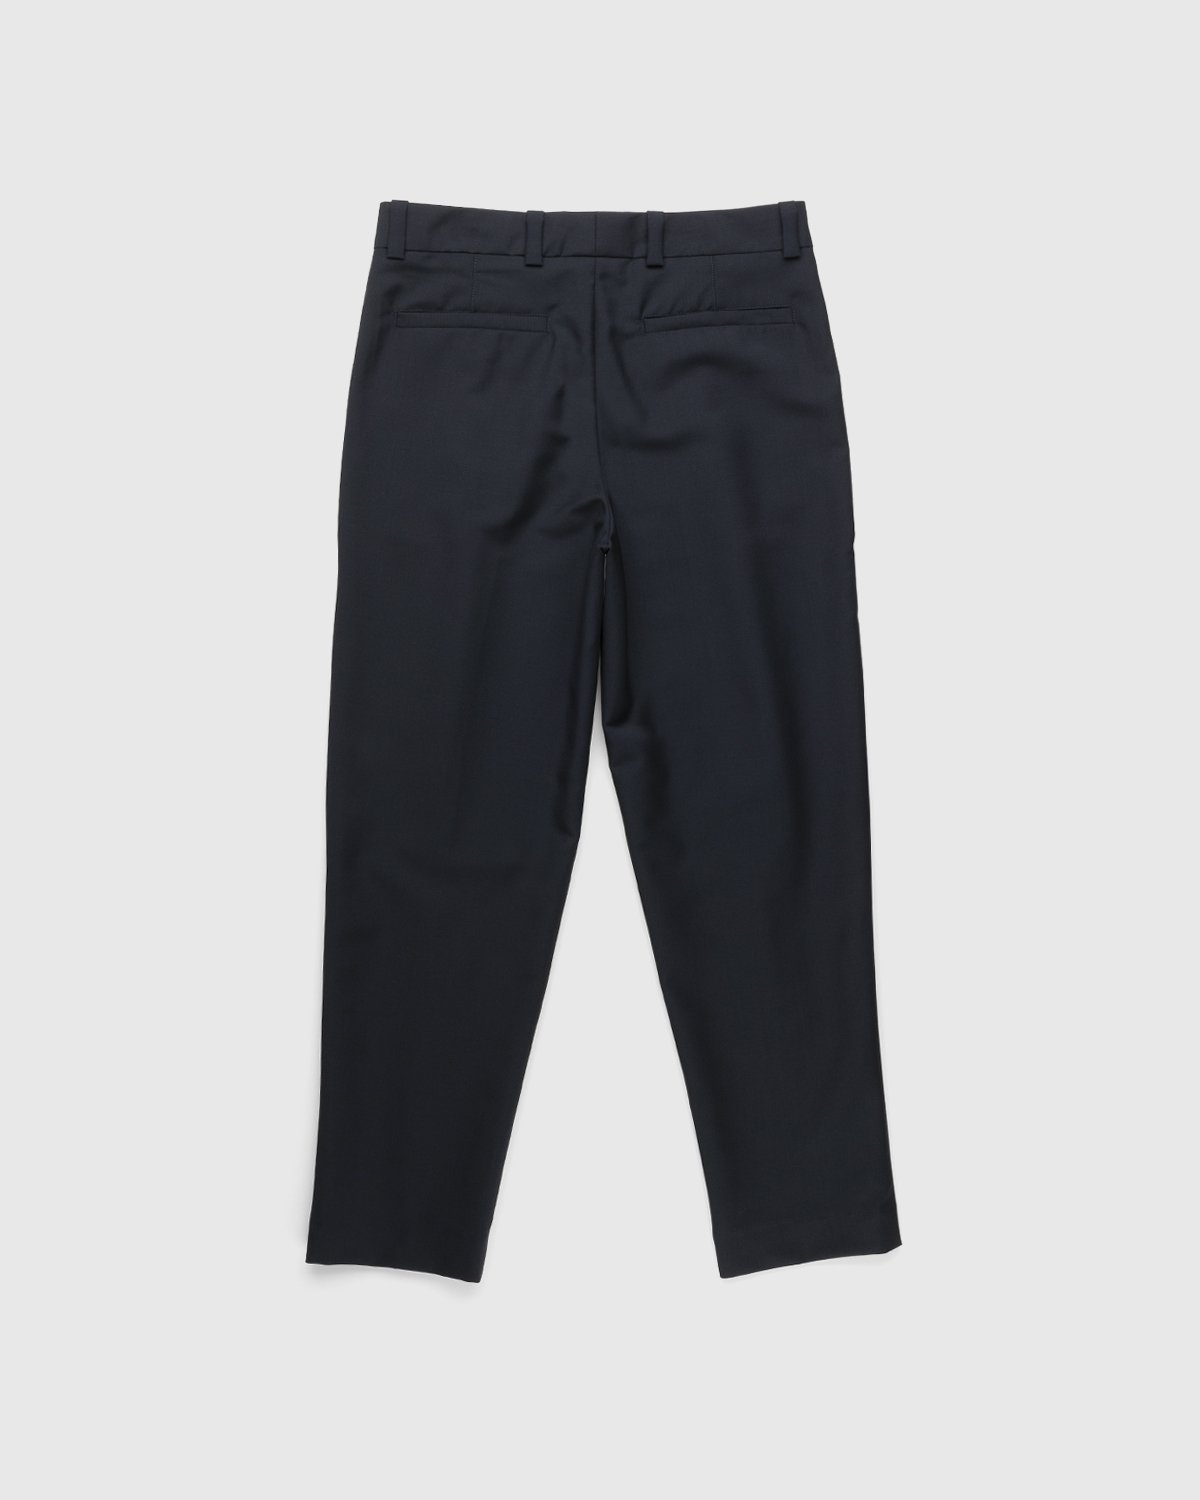 Acne Studios - Mohair Pleated Trousers Navy - Clothing - Blue - Image 2